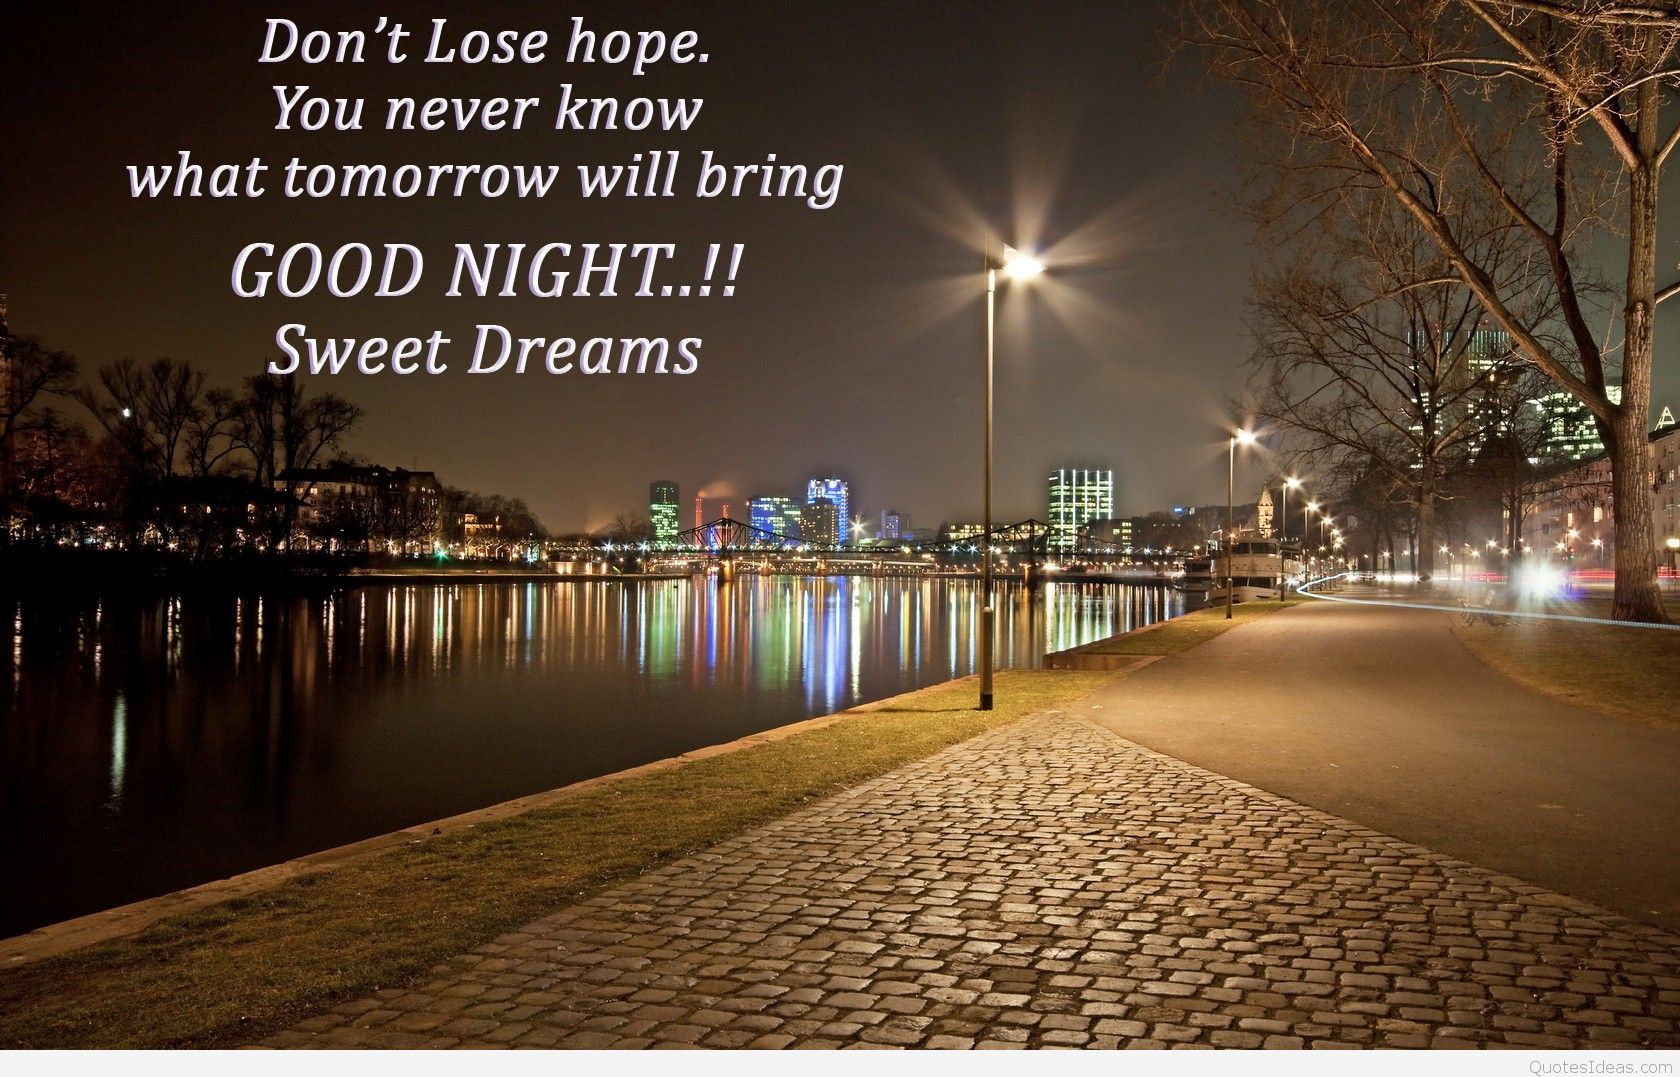 Www - Hdnicewallpapers - Com - Good Night With Beautiful Thought -  1680x1077 Wallpaper 